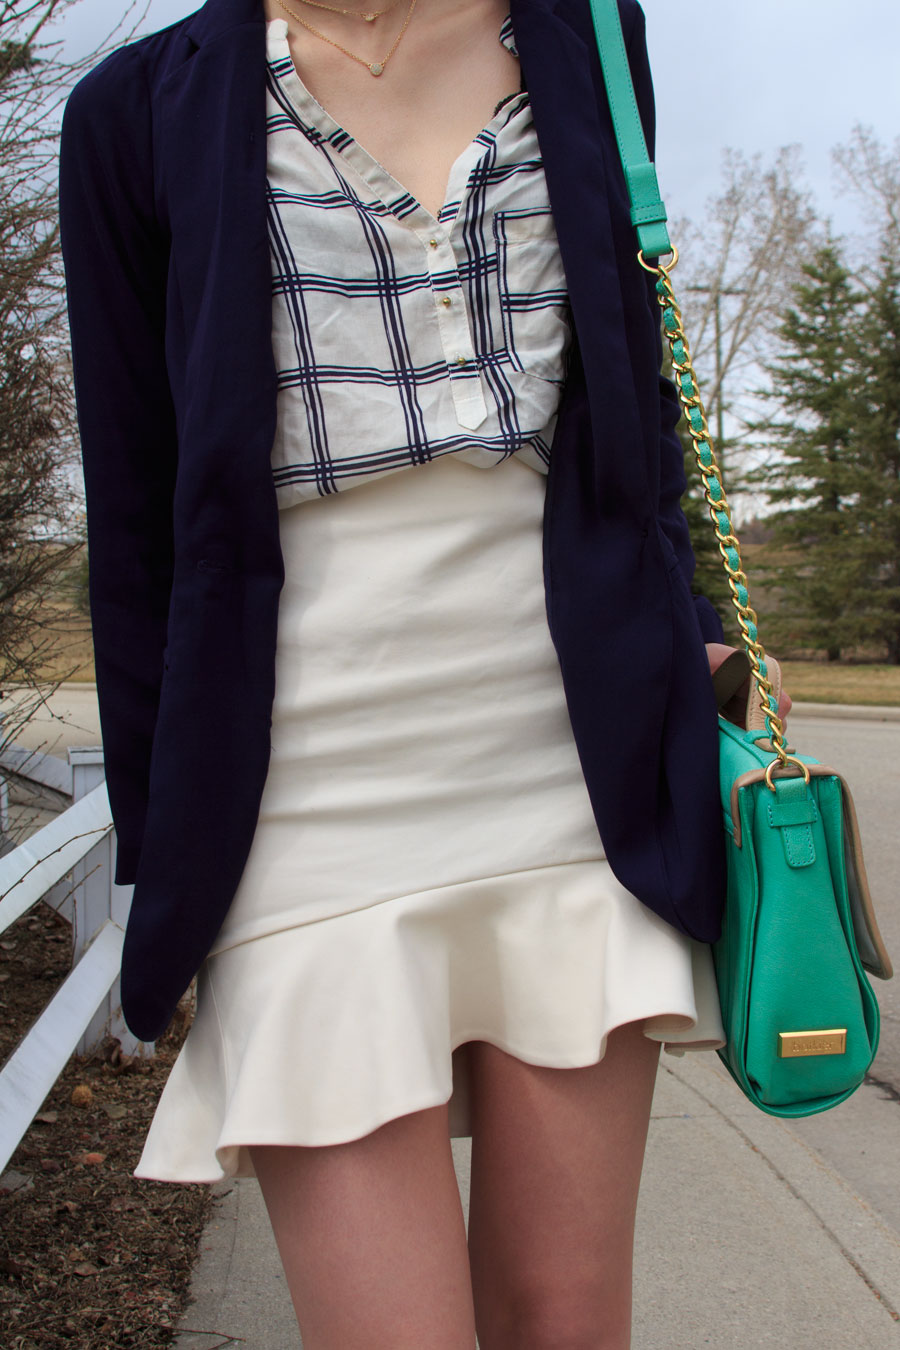 Dynamite, Zara, work wear, Spring Shoes, outfit, personal style, botkier, frilled skirt, peplum